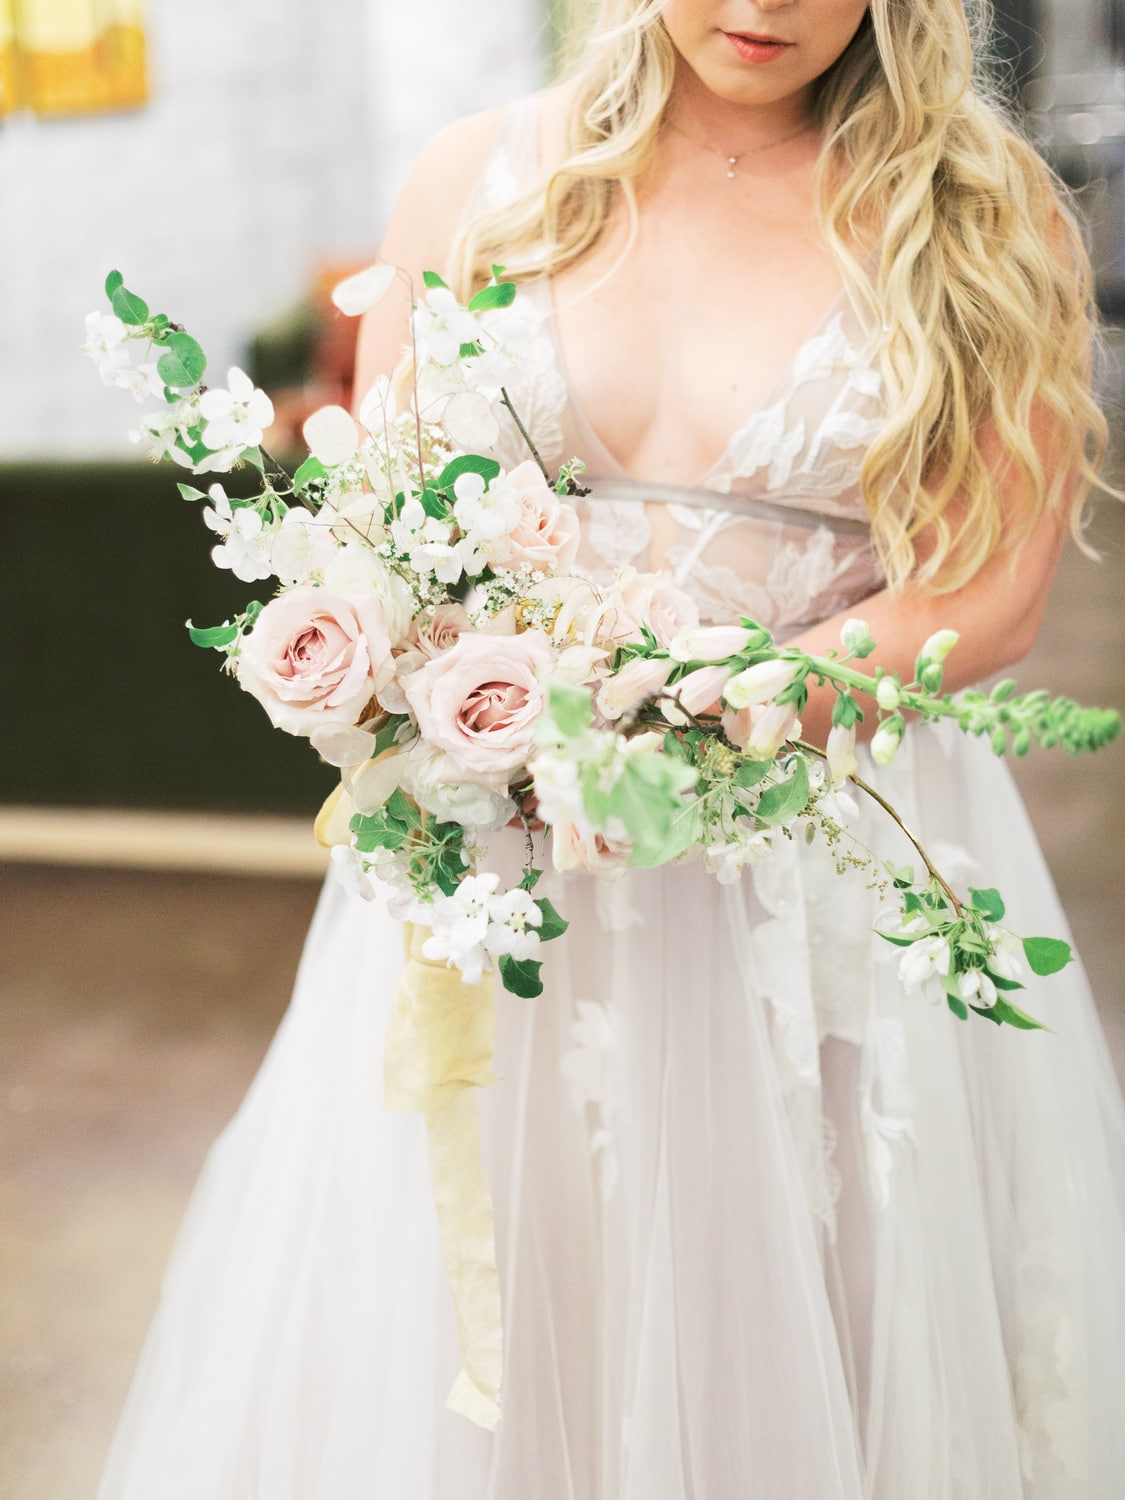 Bride holding bouquet of dried flowers, hellebore, and roses